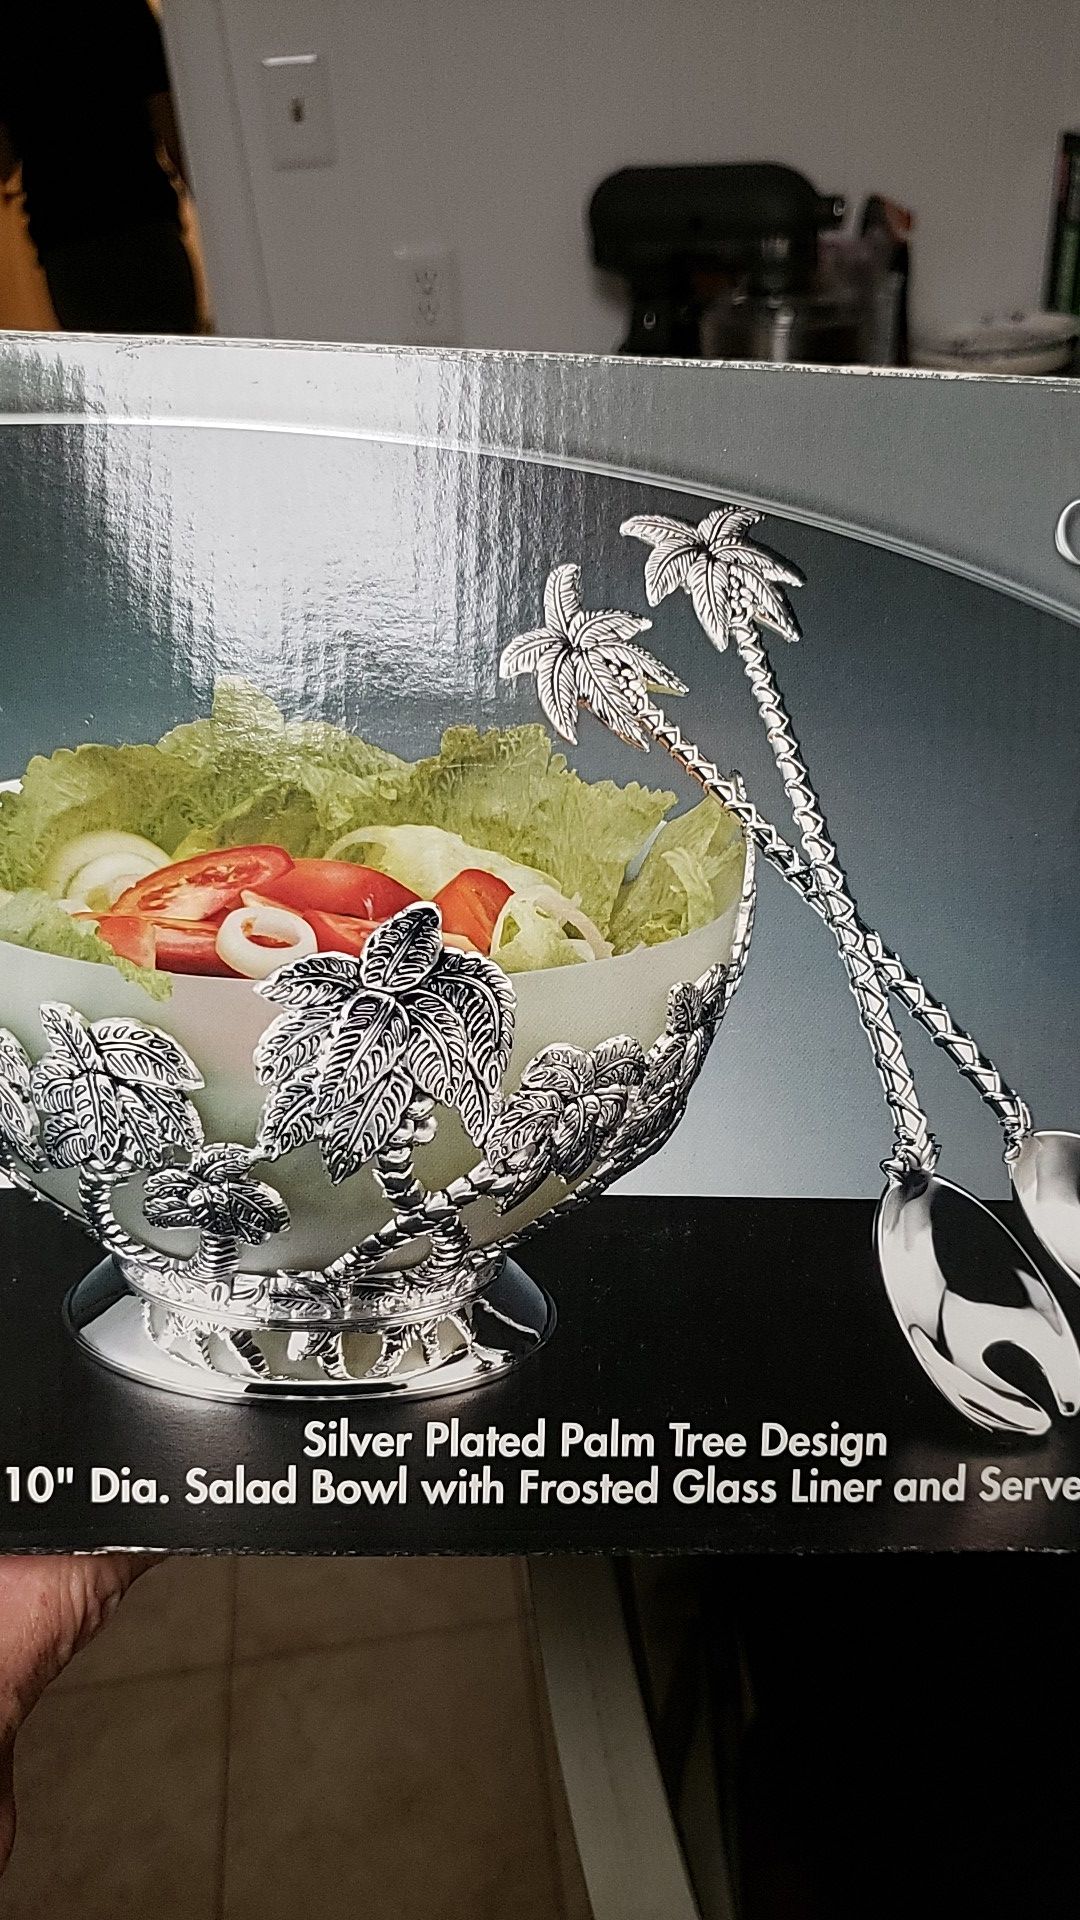 Salad bowl with salad spoons